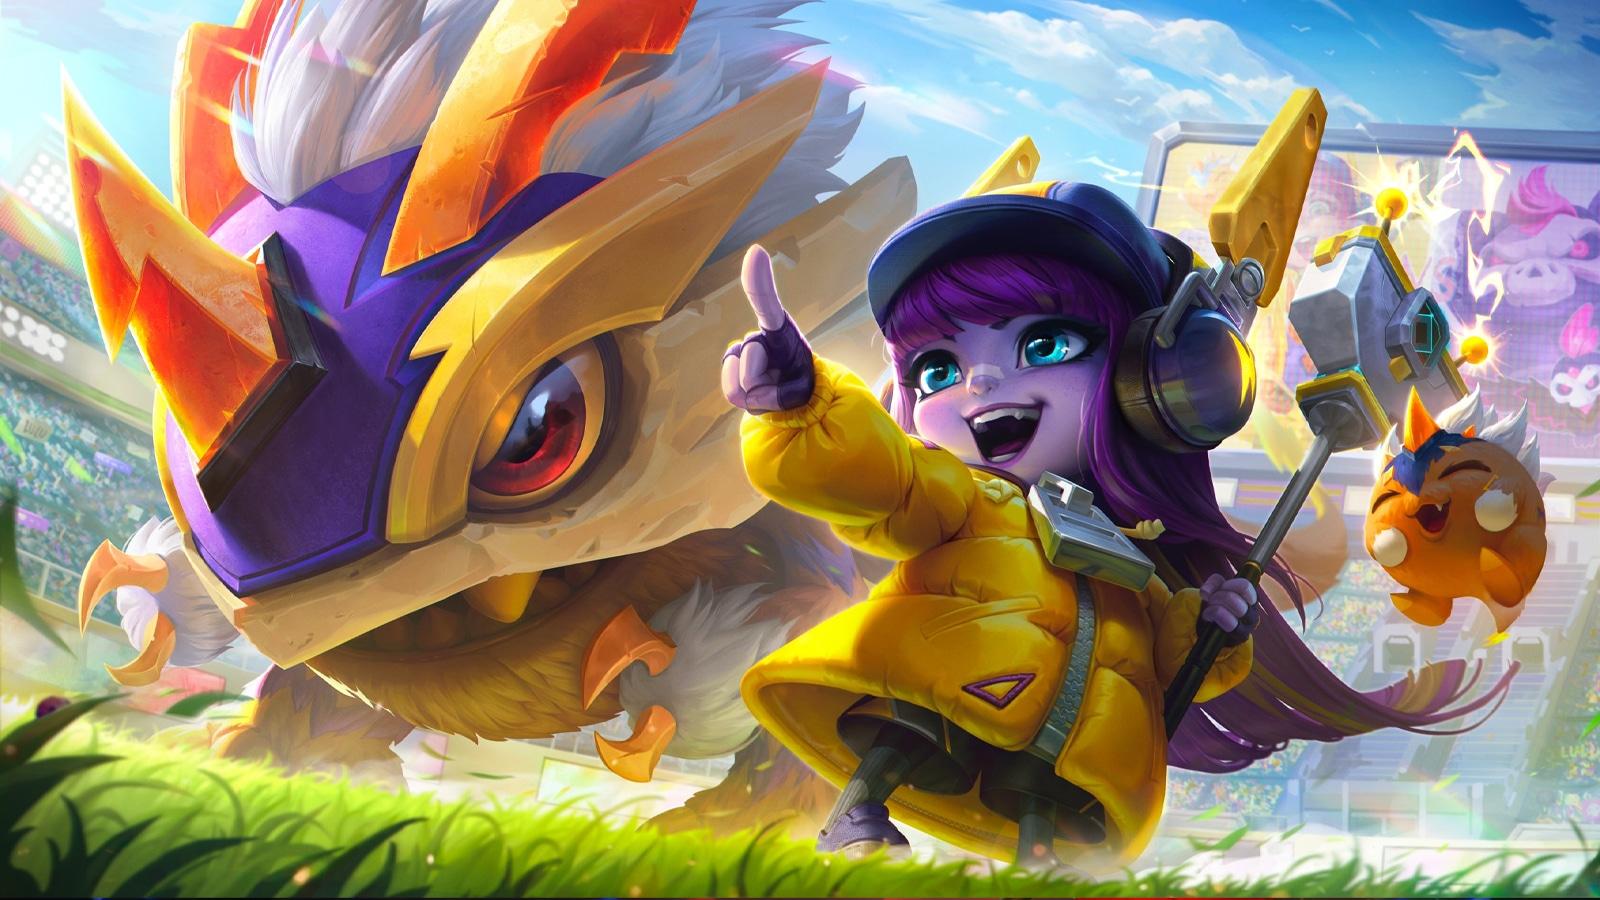 Monster Tamer Lulu and Kog'Maw in League of Legends